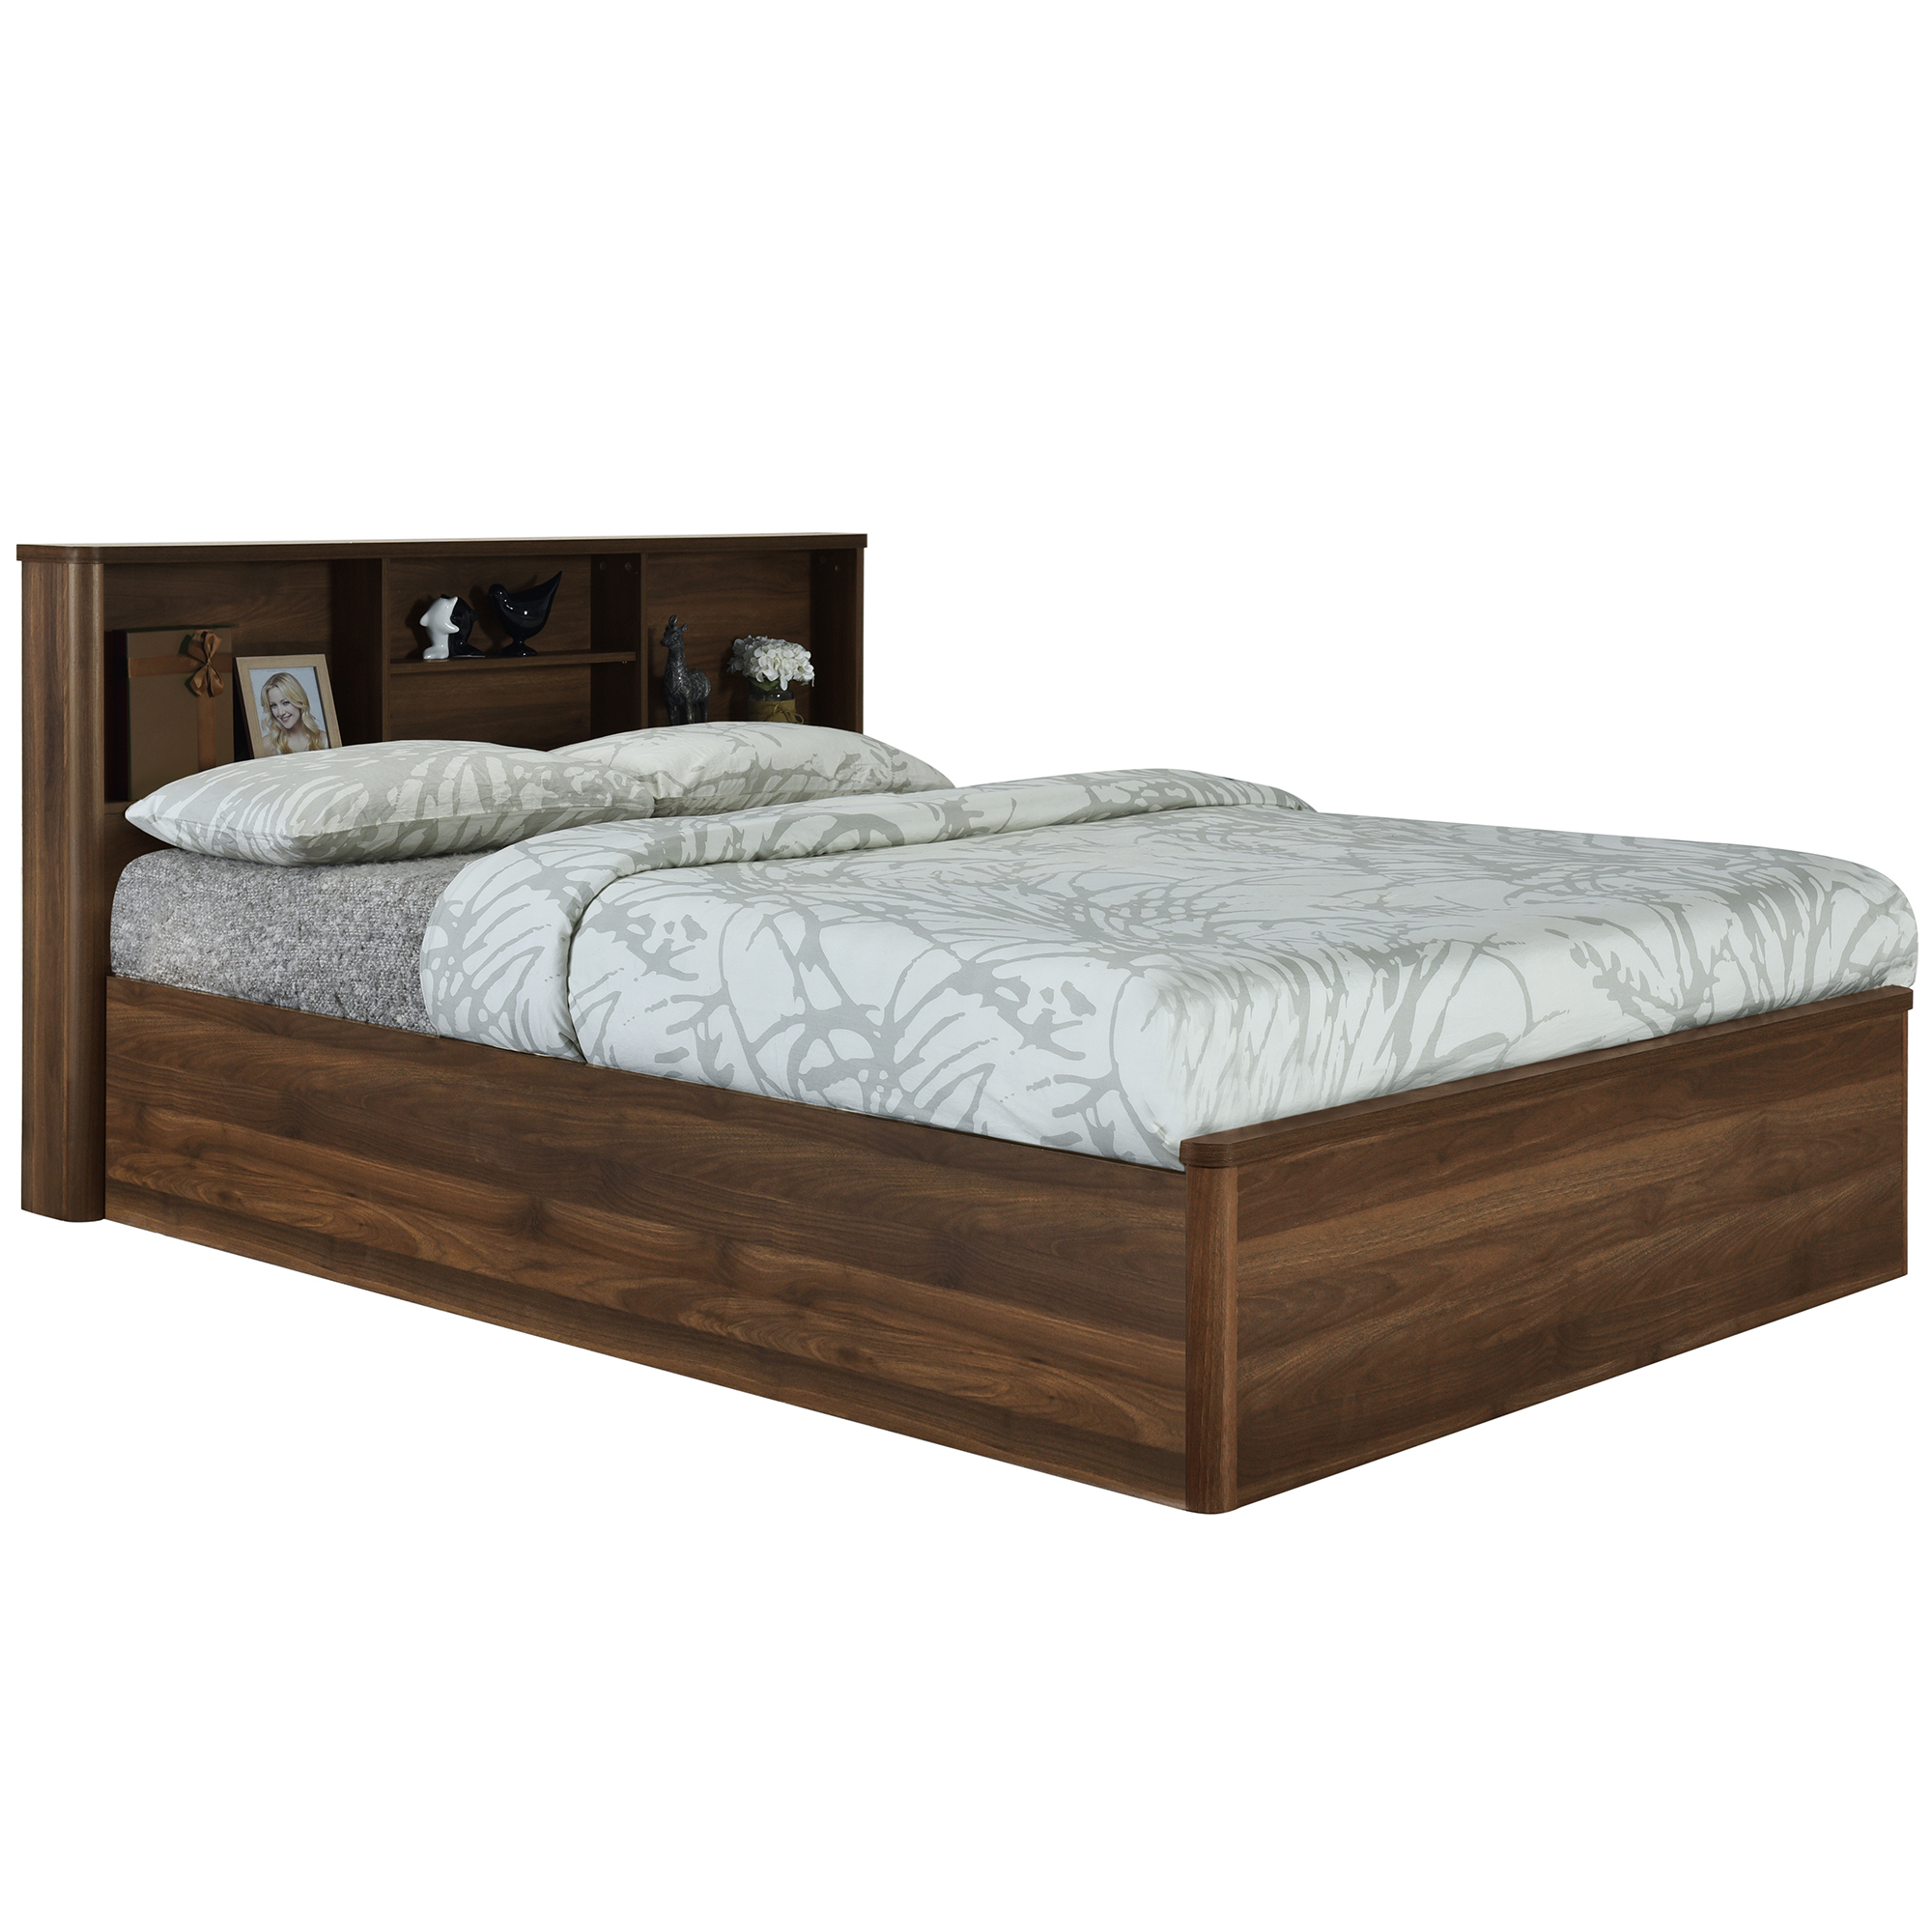 With Bookcase Headboard, Full Size Bed With Bookcase Headboard